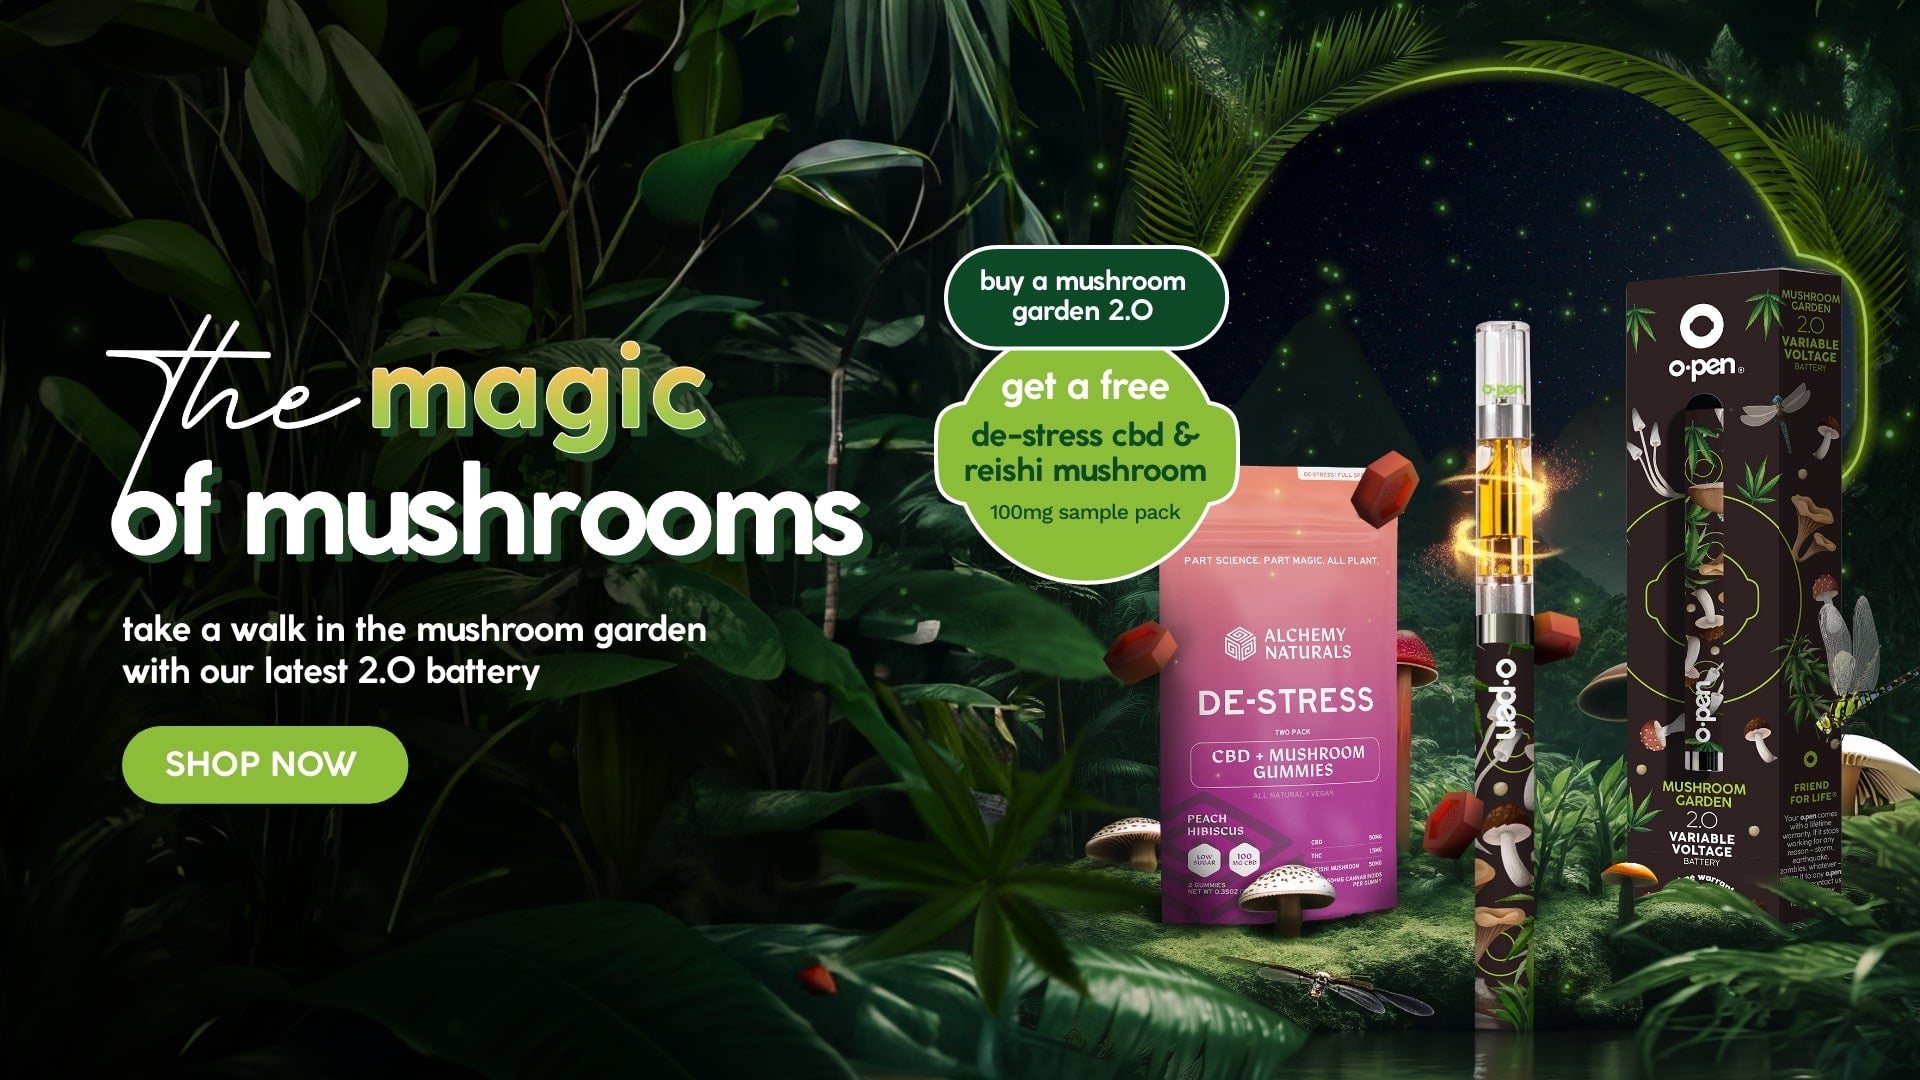 the magic of mushrooms - take a walk in the mushroom garden with our latest 2.0 battery - shop now